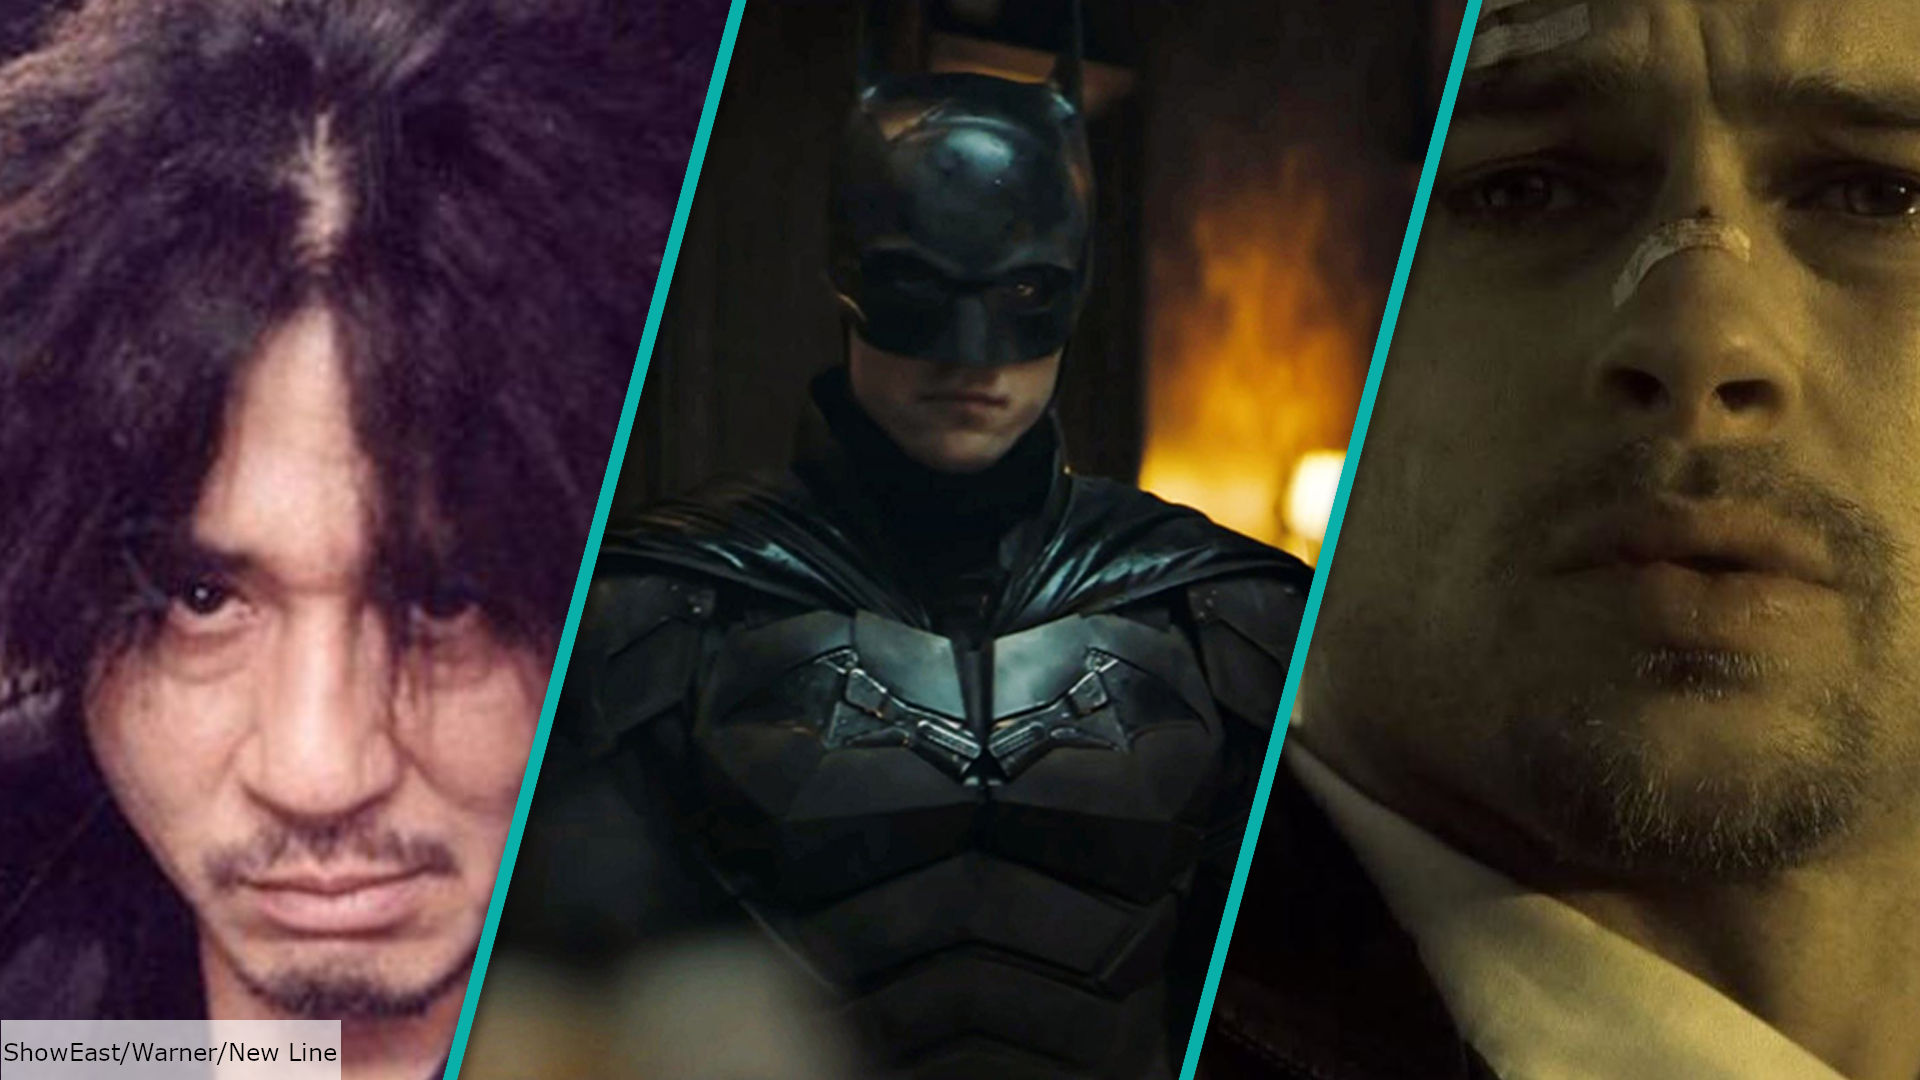 If you liked The Batman, check out these movies | The Digital Fix